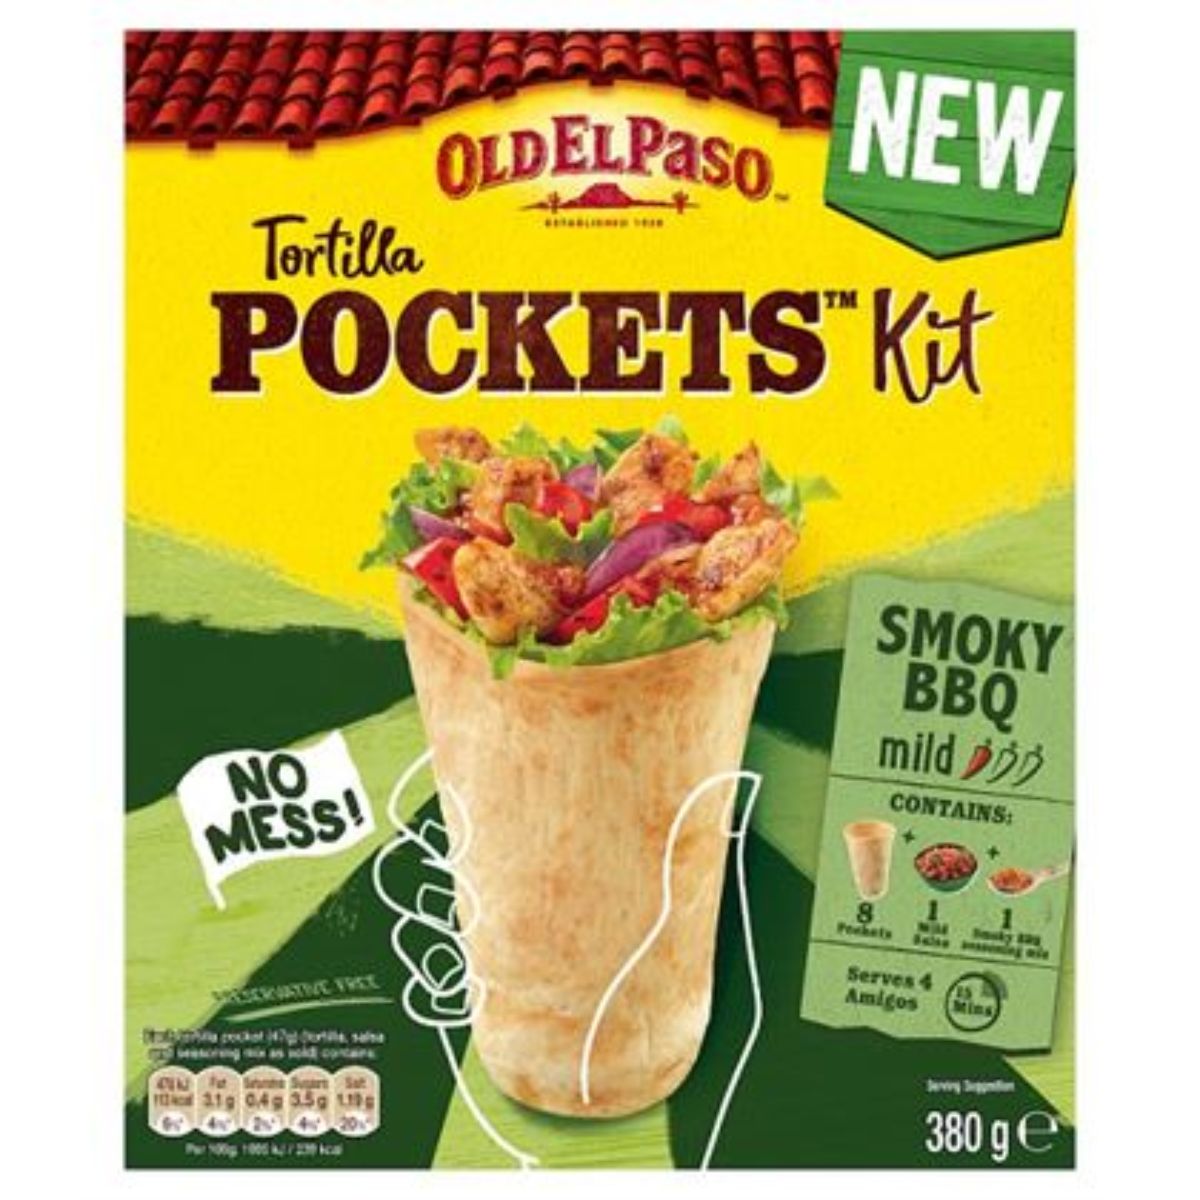 A package of Old El Paso - Tortilla Pocket - 380g with a bbq smoky flavor.